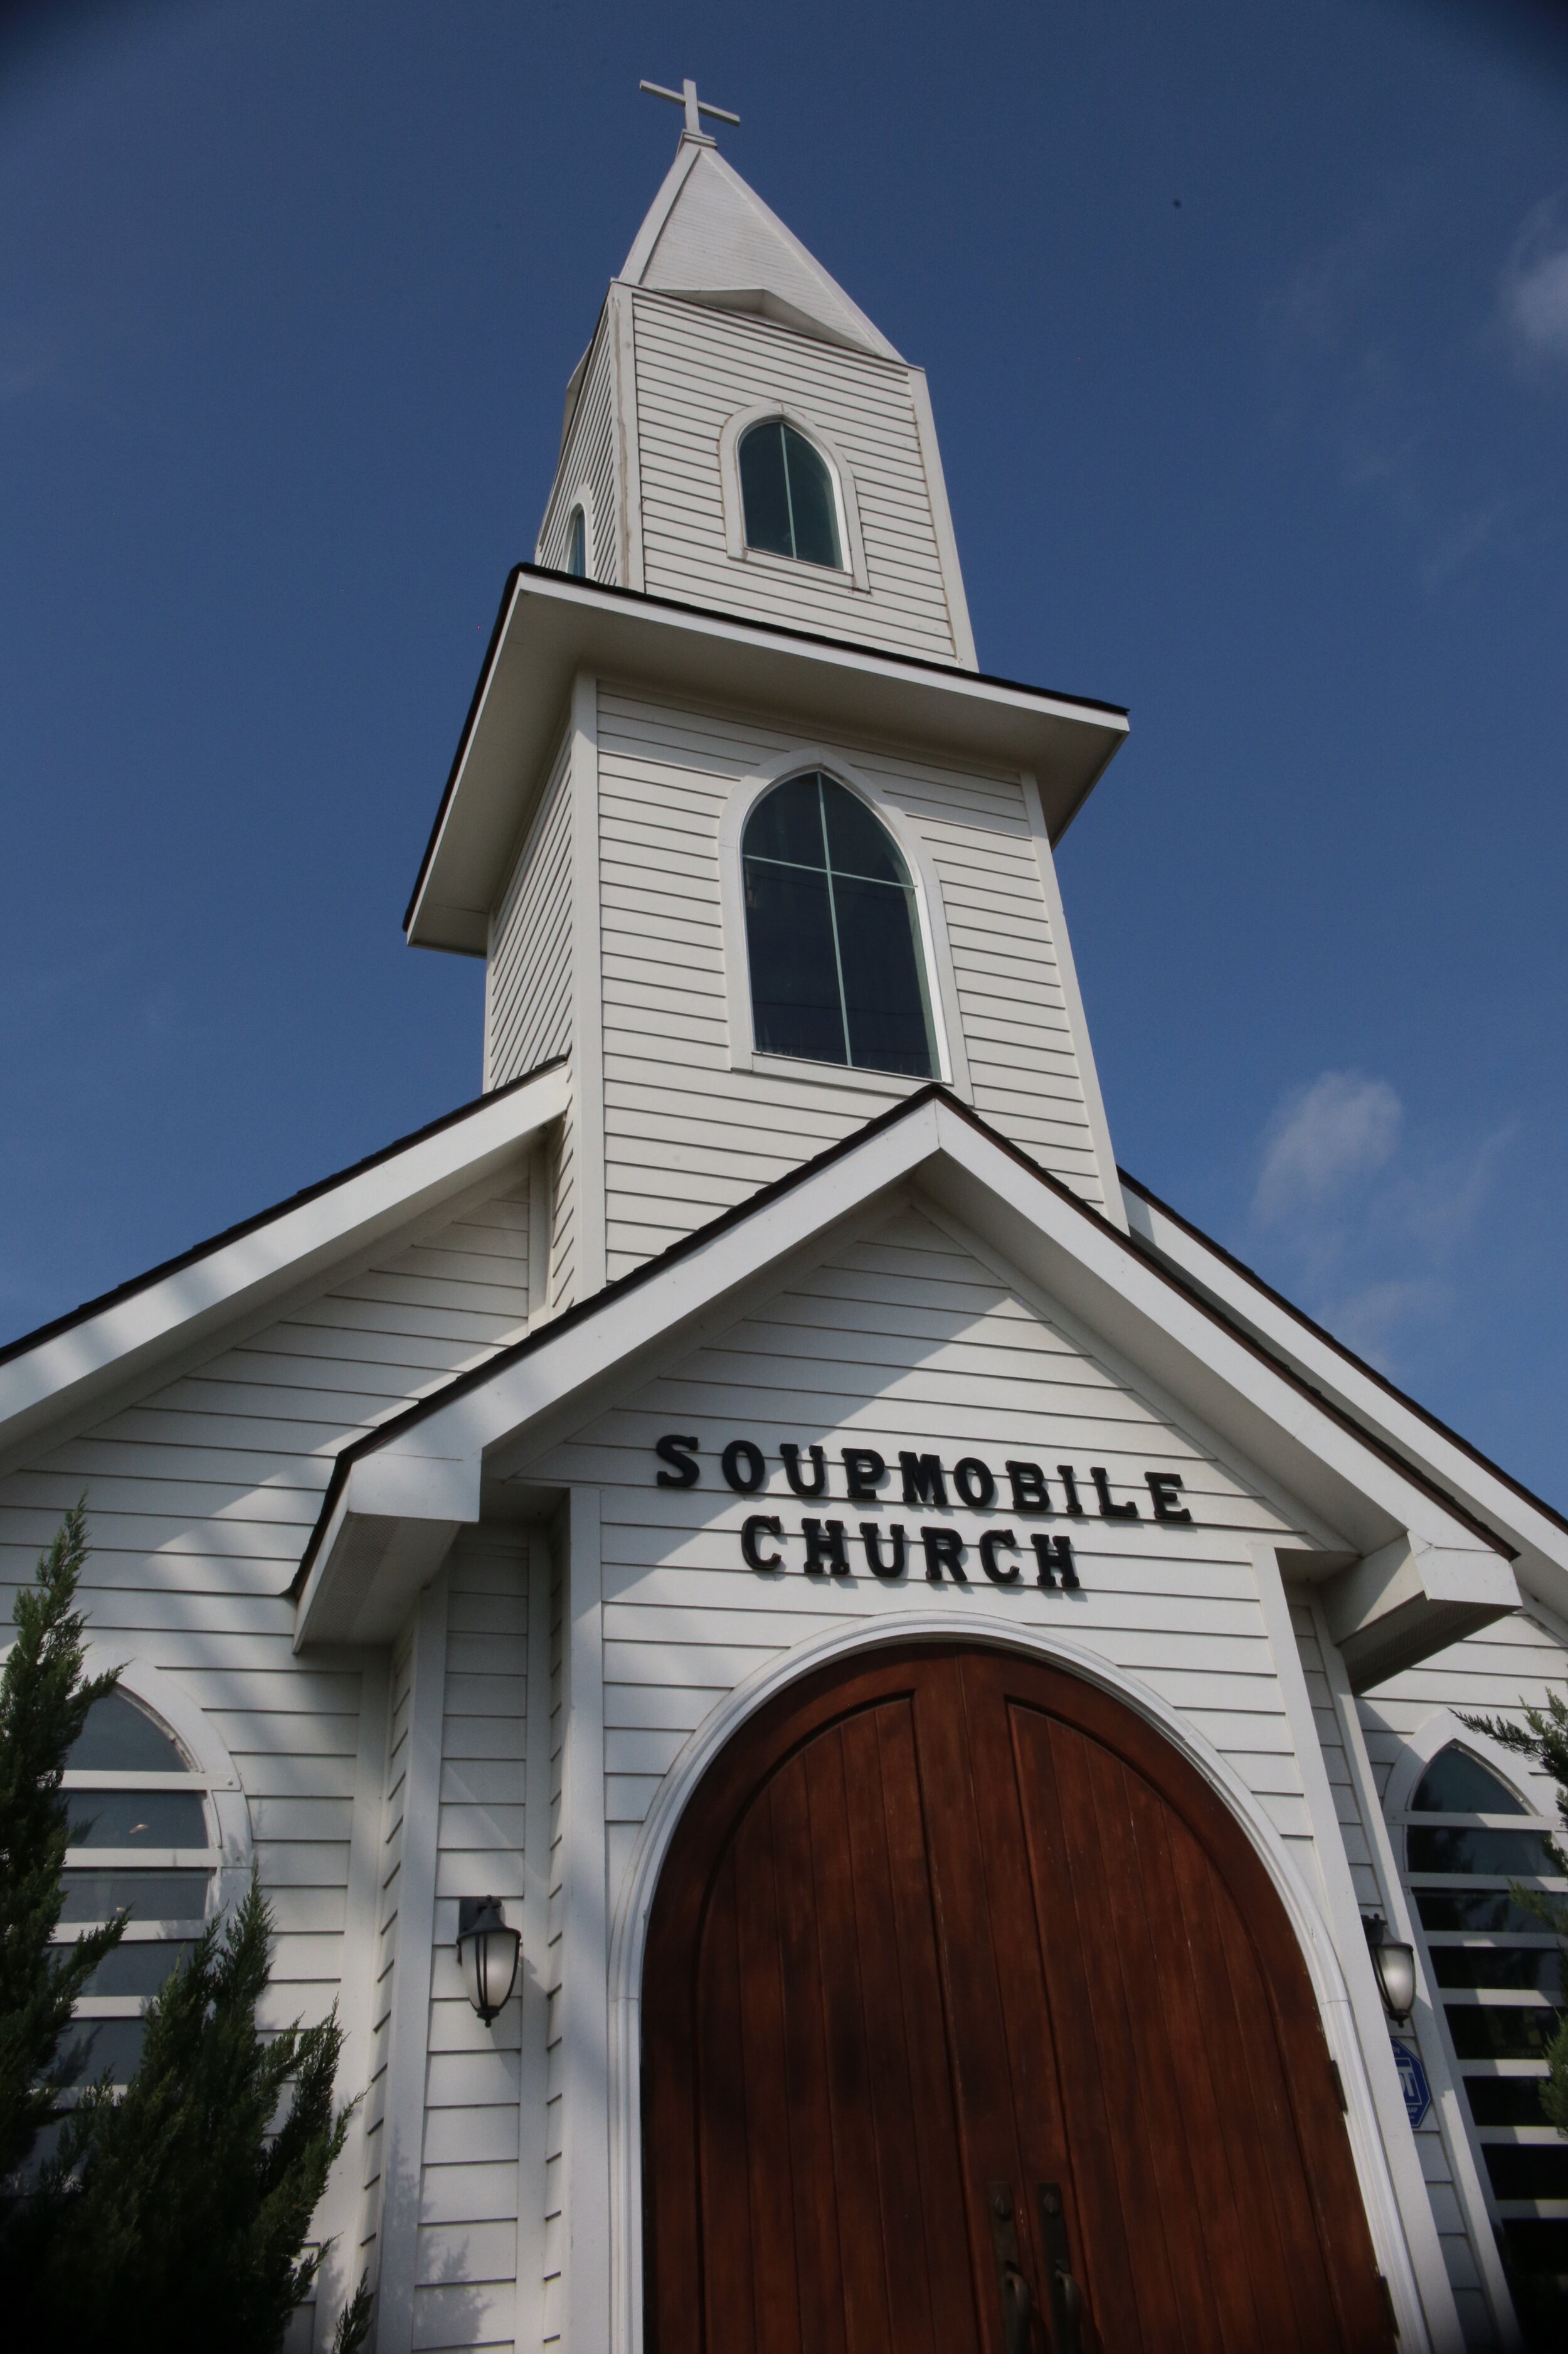 The SoupMobile Church located on Good Latimer Street in Dallas.